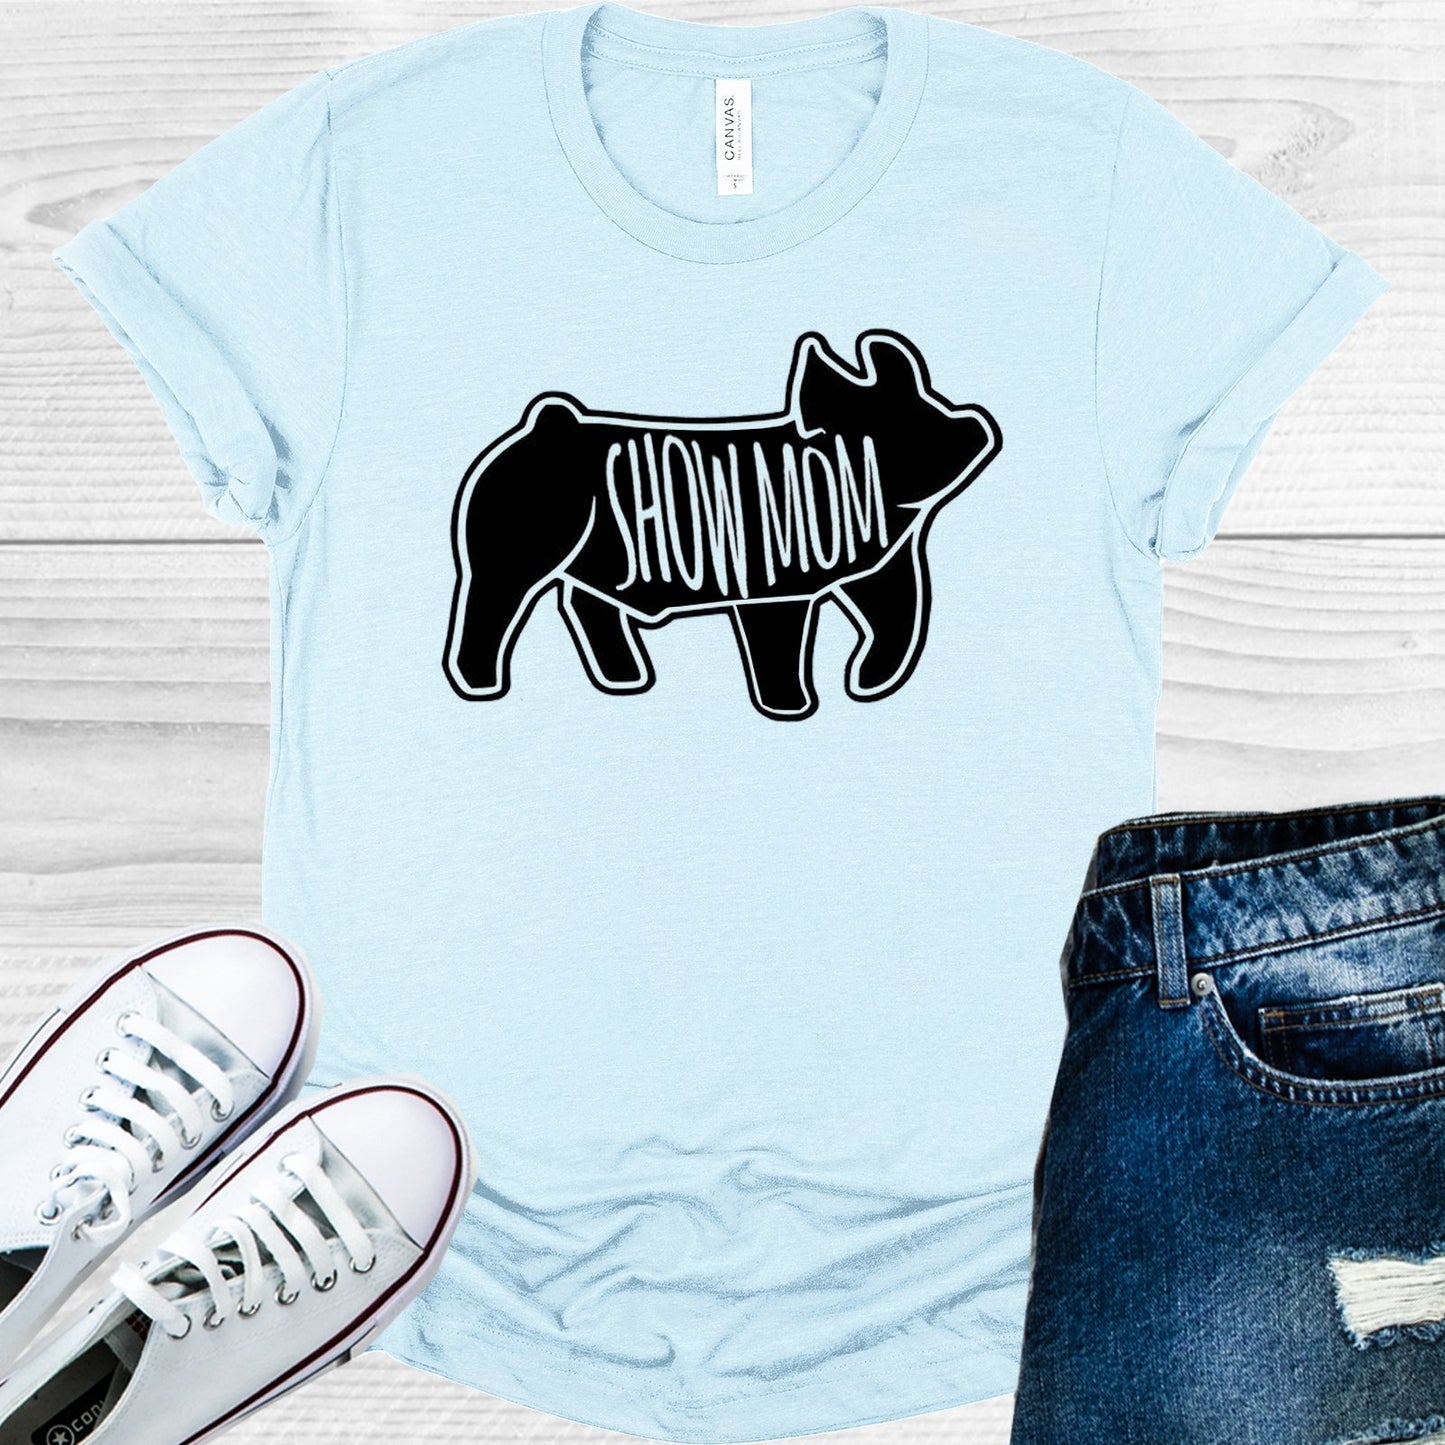 Show Mom Pig Graphic Tee Graphic Tee